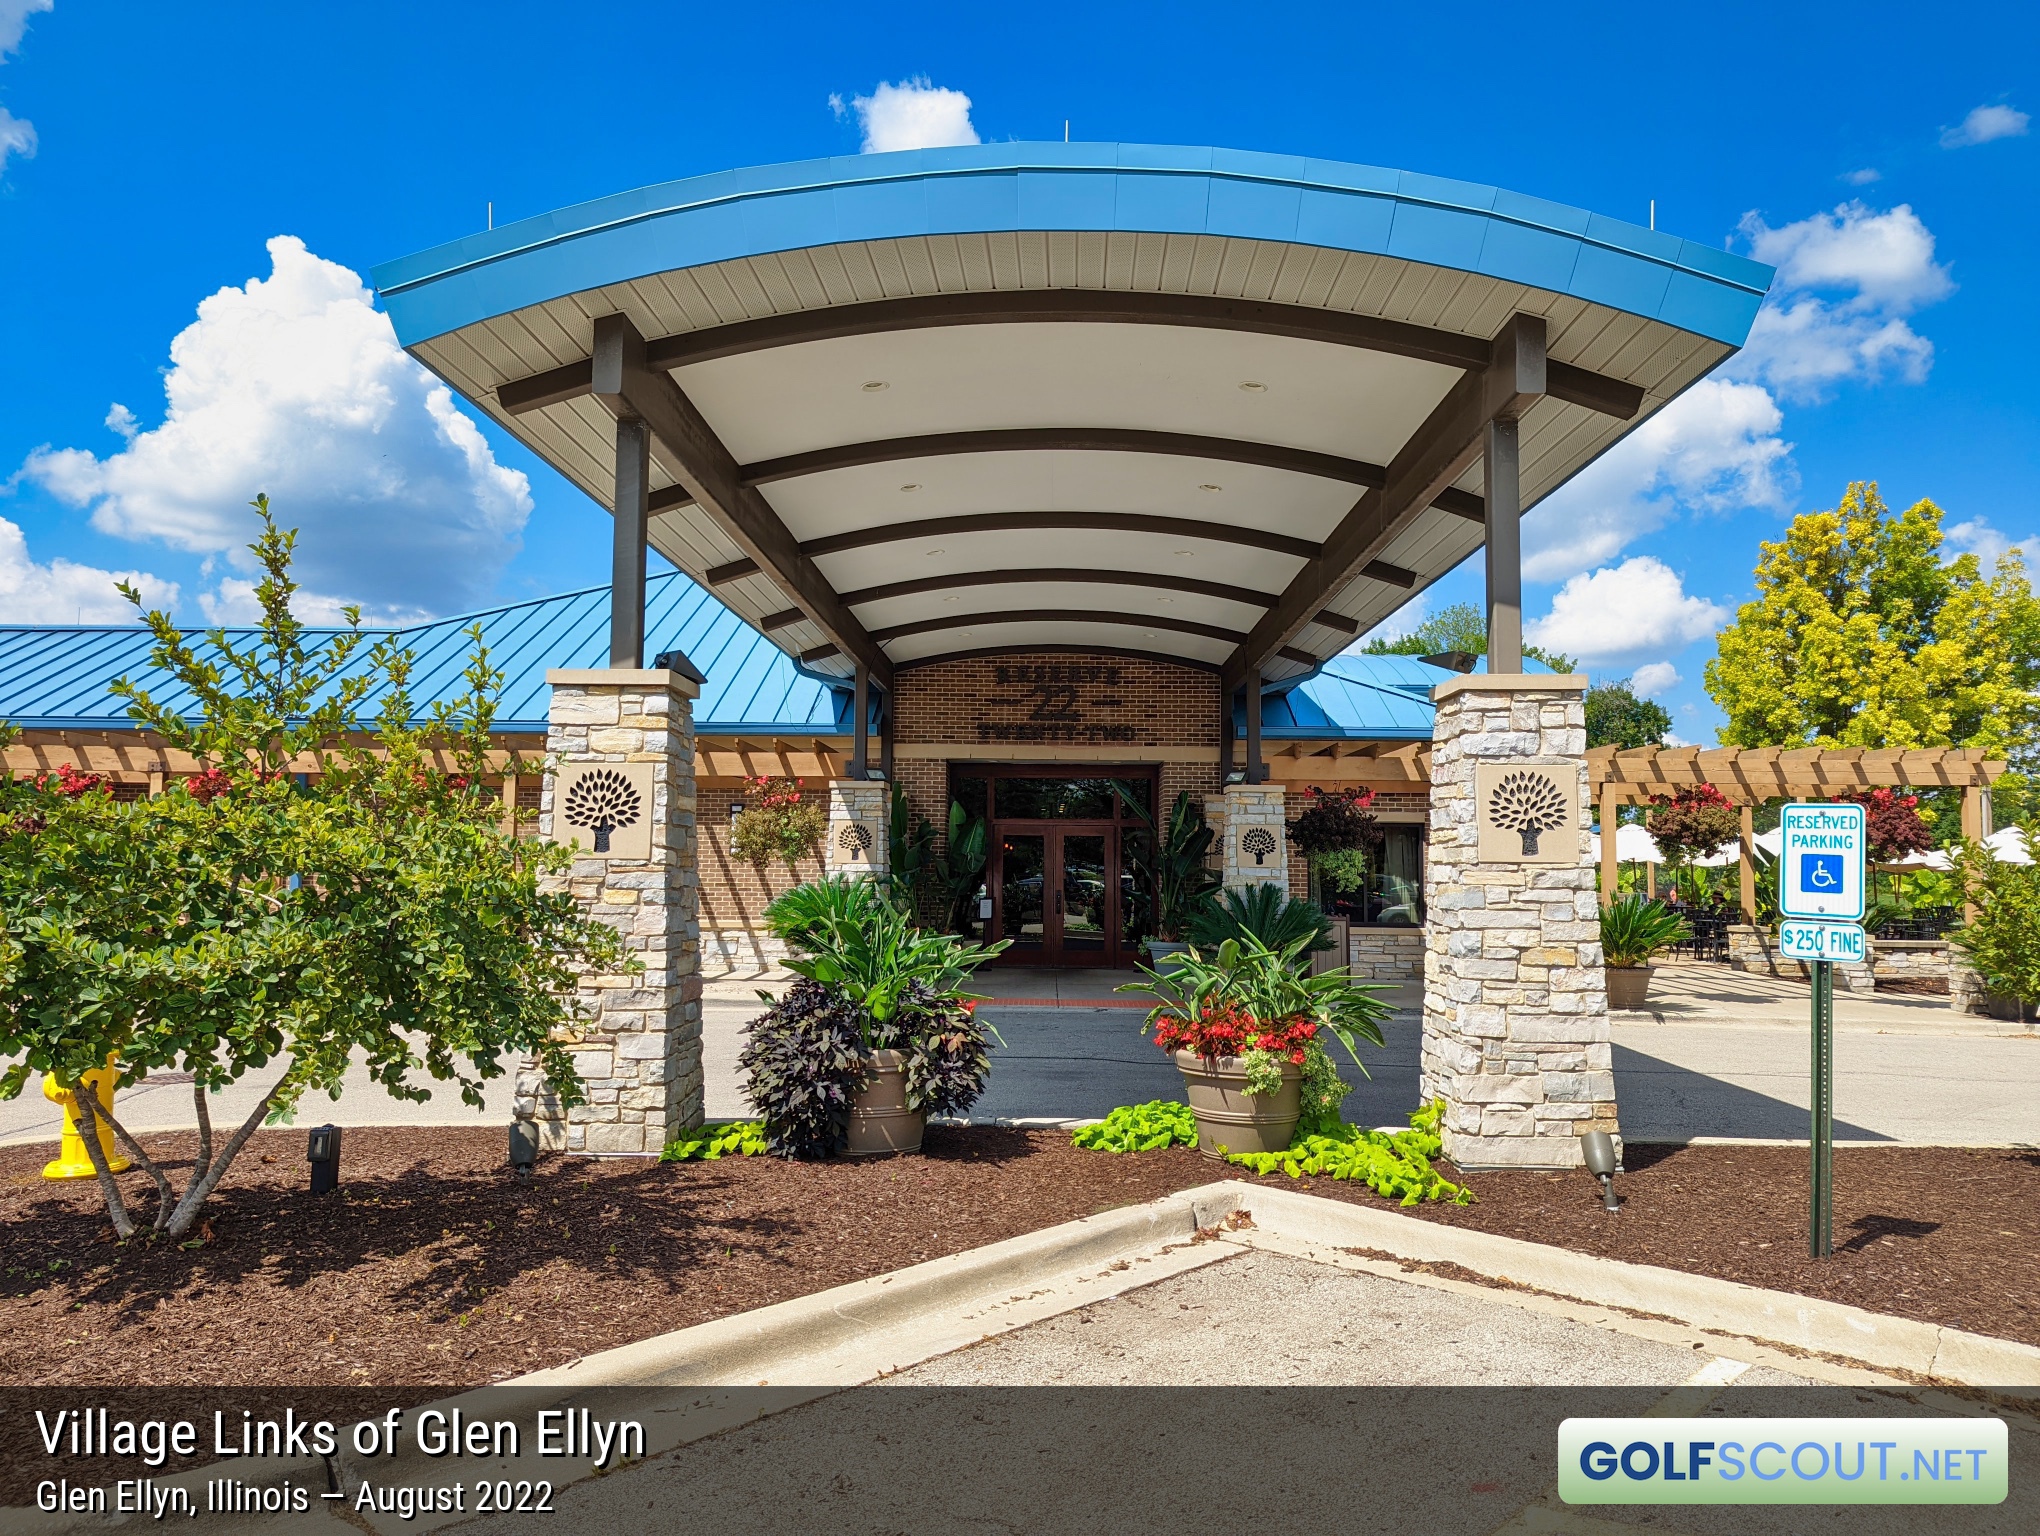 Photo of the clubhouse at Village Links of Glen Ellyn - 18 Hole Course in Glen Ellyn, Illinois. 